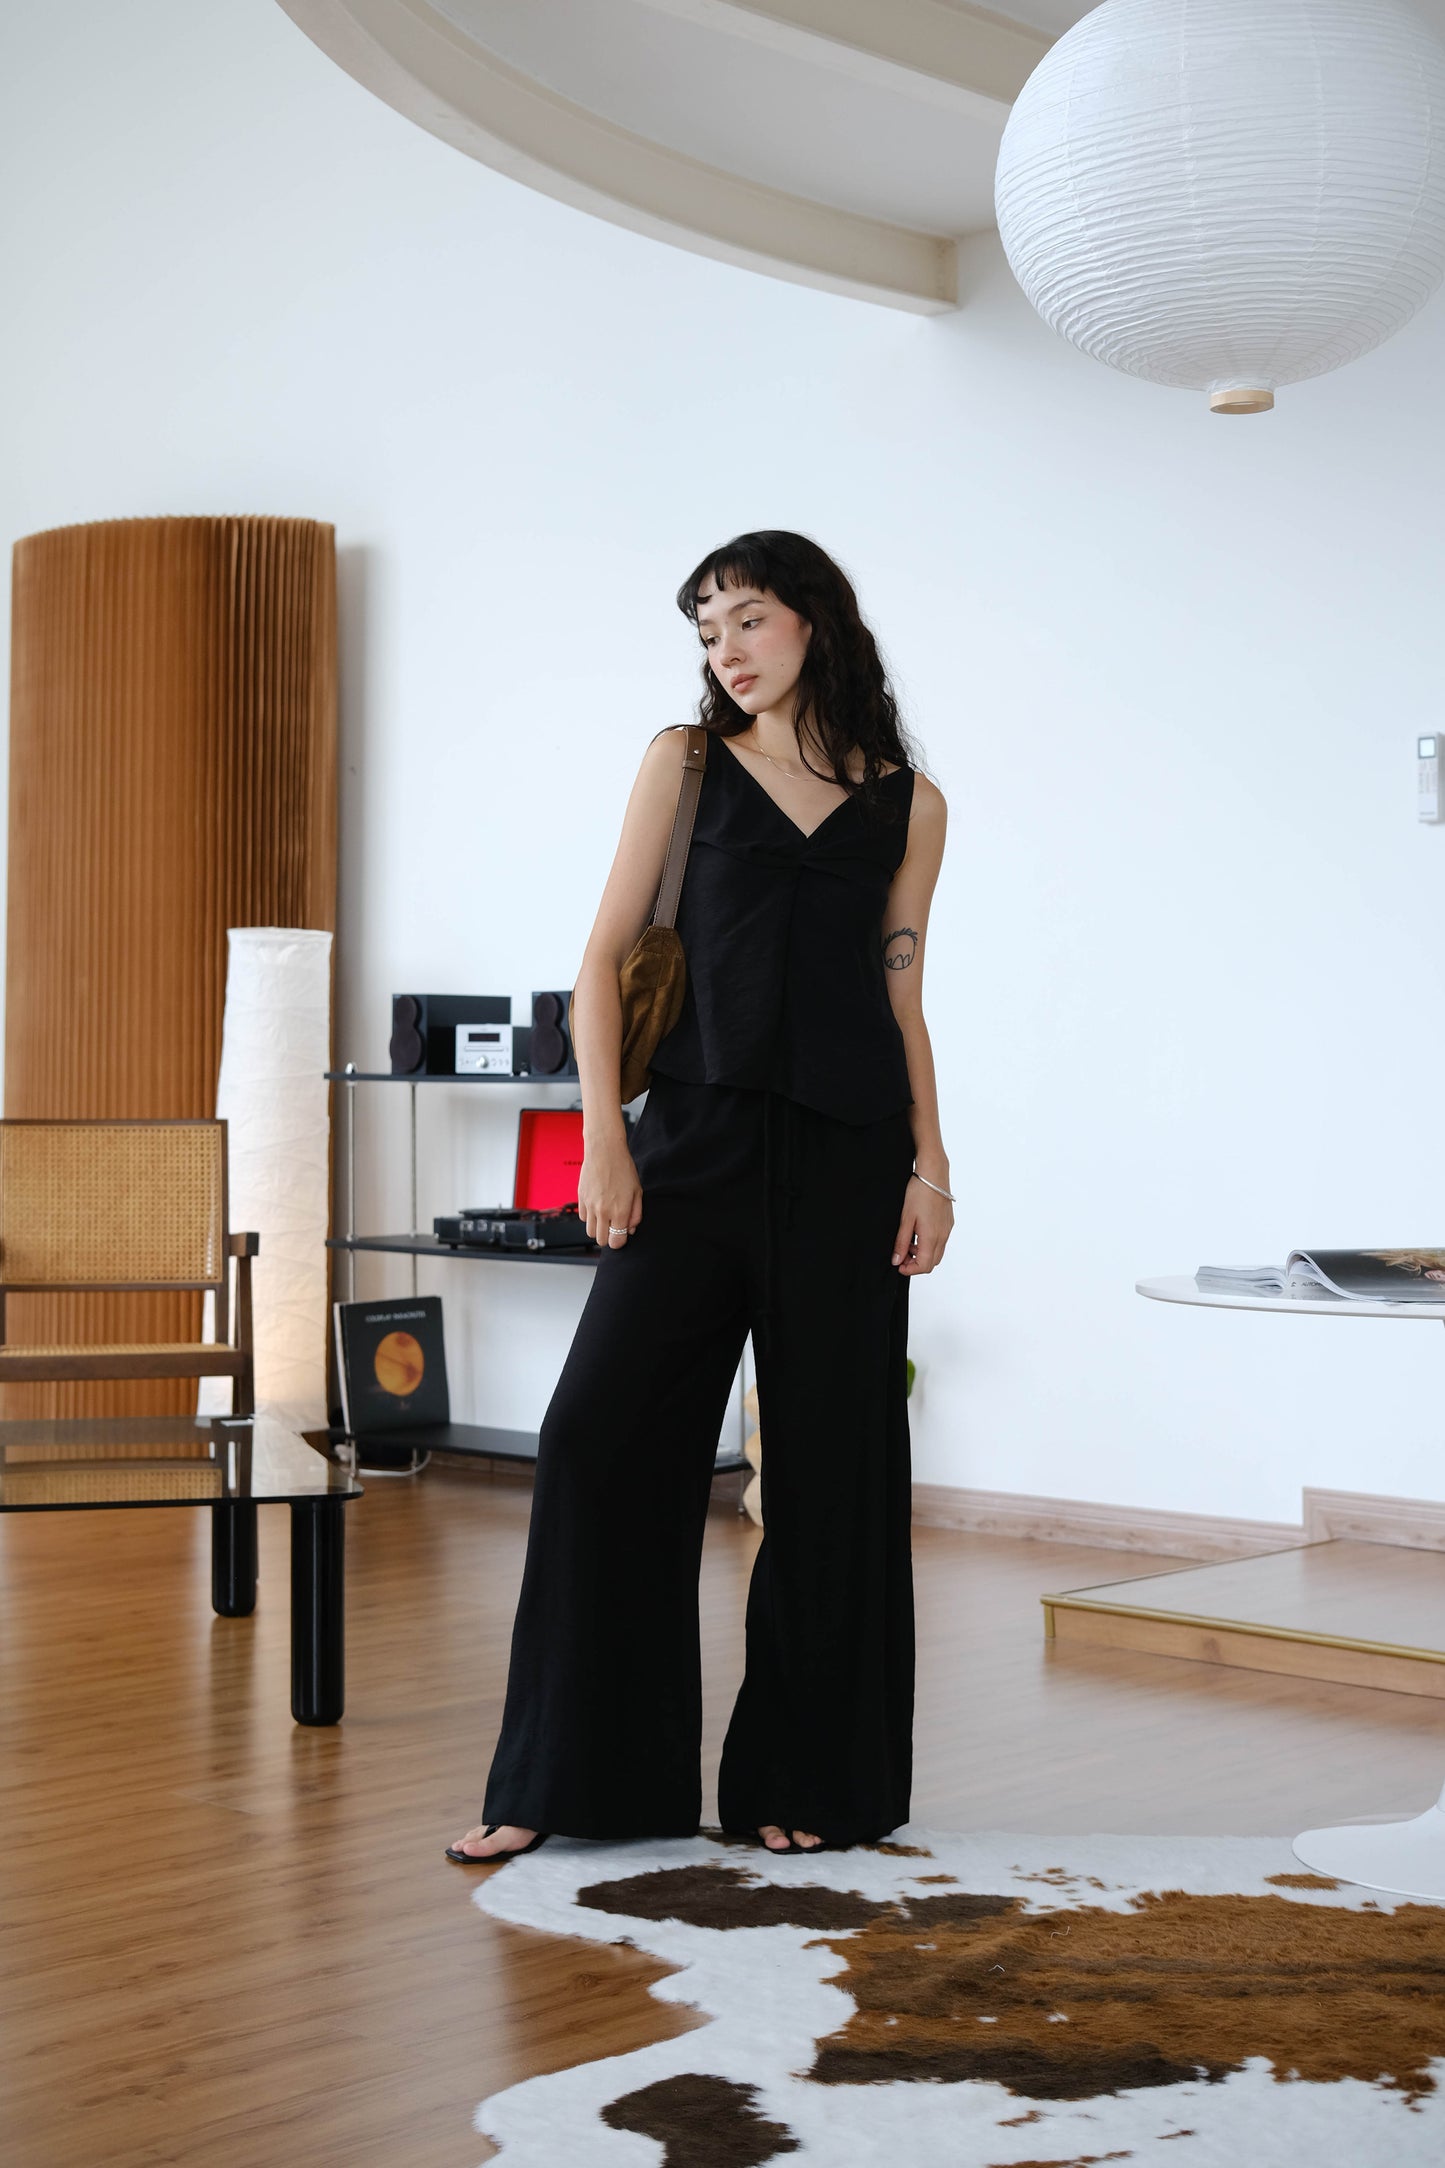 Casual Wide-leg pants in classic black with Pocket